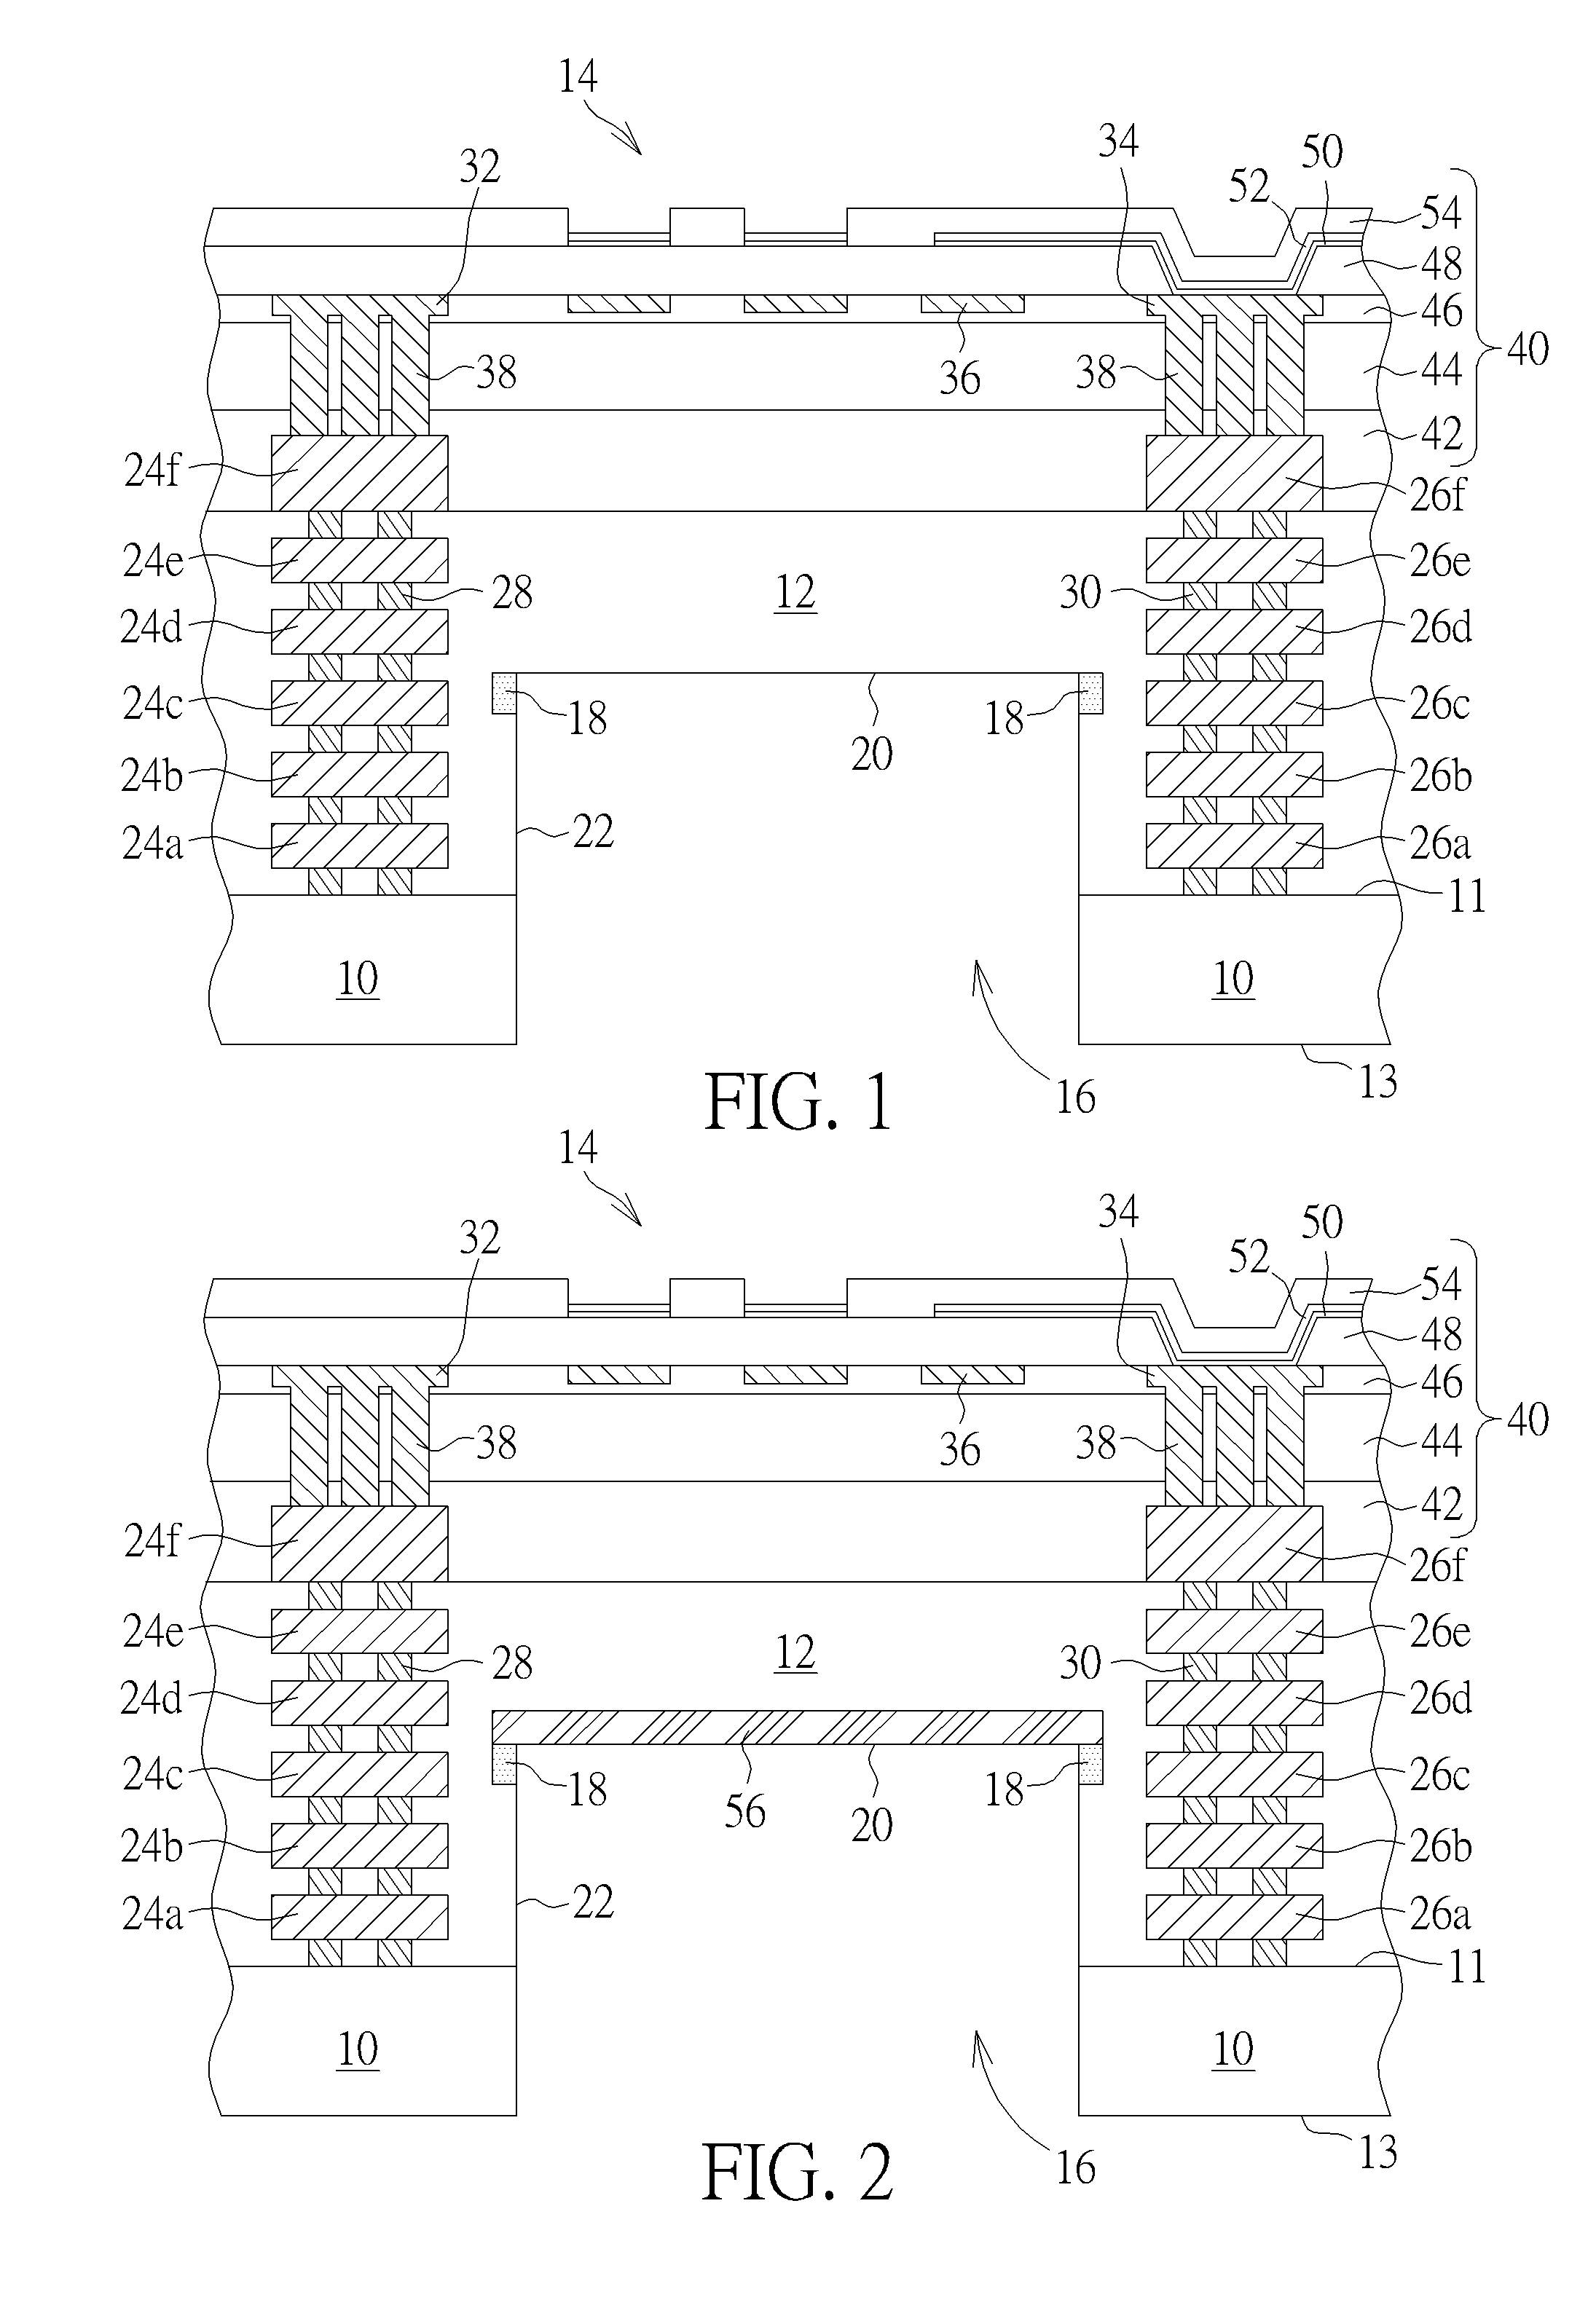 Method for forming MEMS structure with an etch stop layer buried within inter-dielectric layer